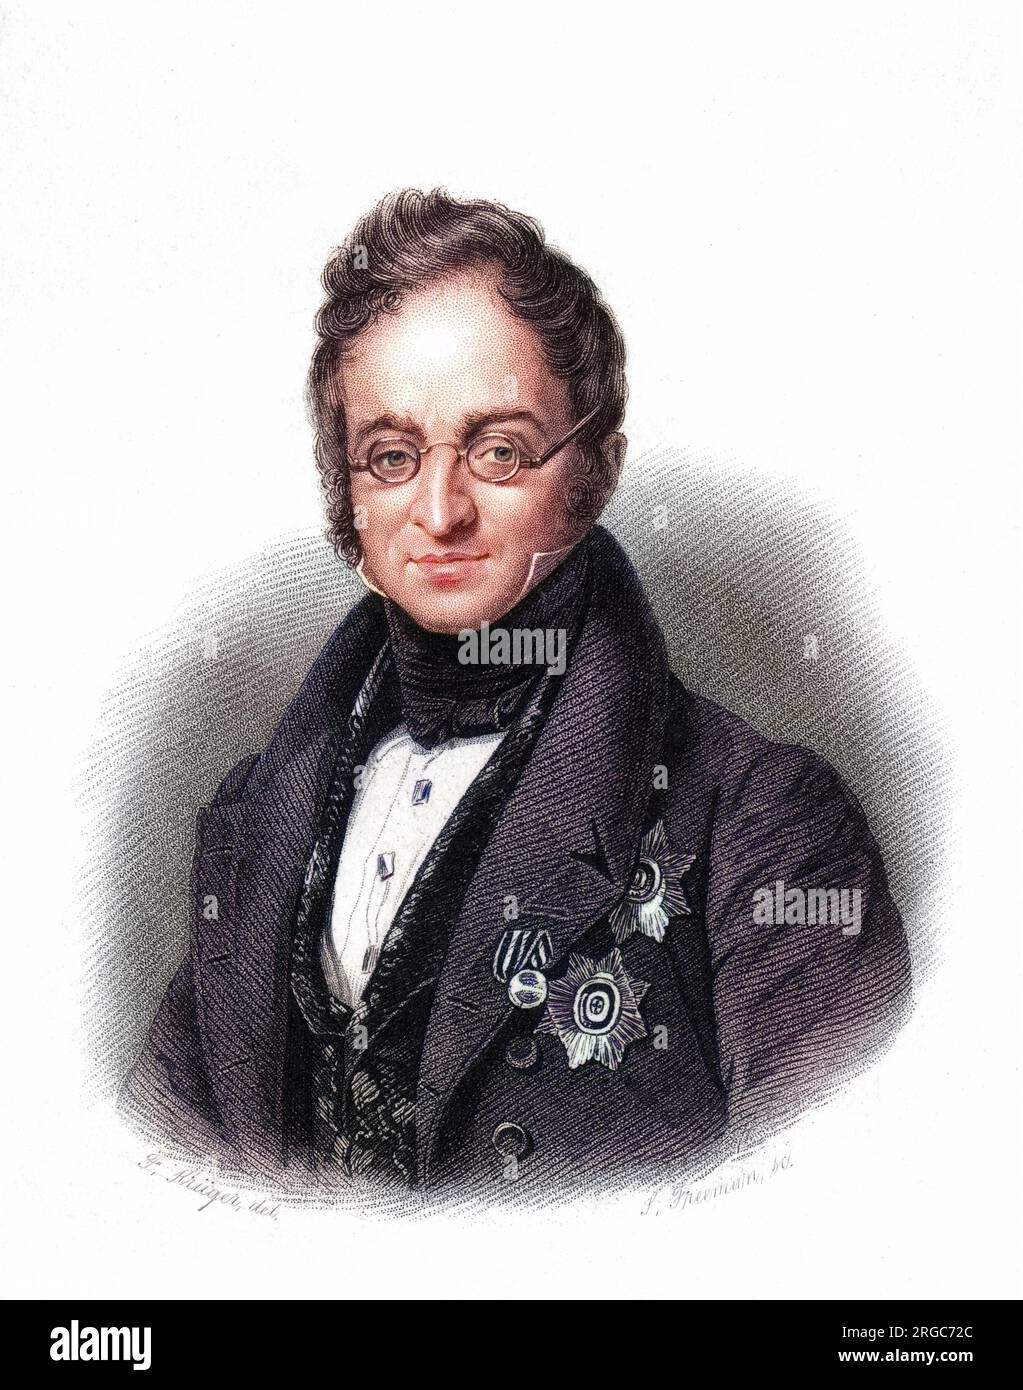 KARL ROBERT graf von NESSELRODE - Russian diplomat at Congress of Vienna etc., whose policies did much harm, including helping to precipitate the Crimean War. Stock Photo